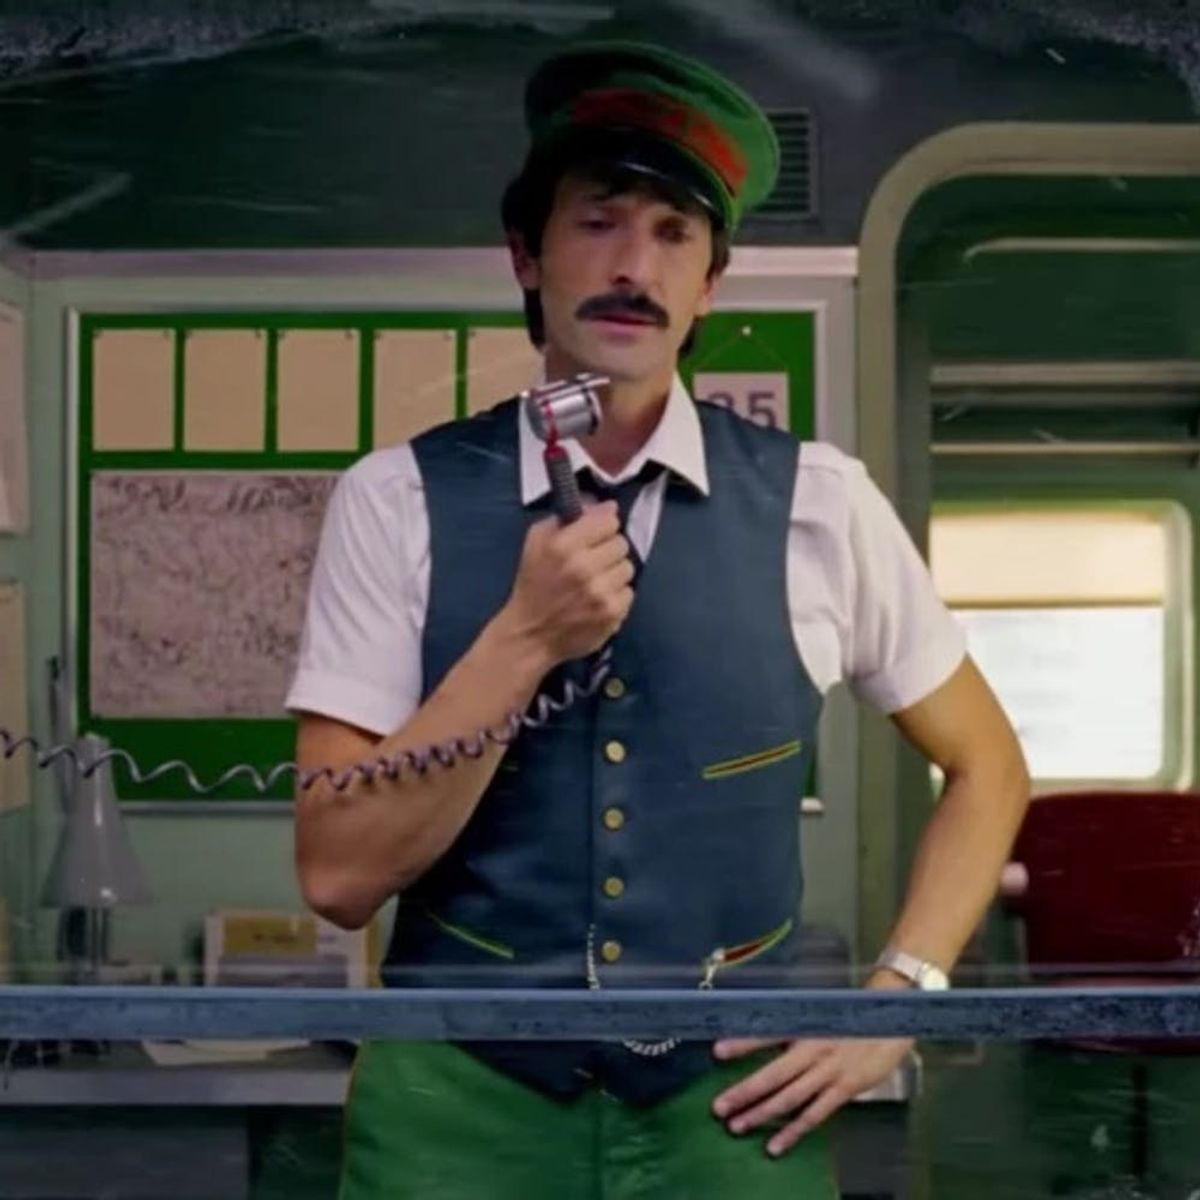 Watch Wes Anderson’s New H&M Christmas Short Film Starring Adrien Brody